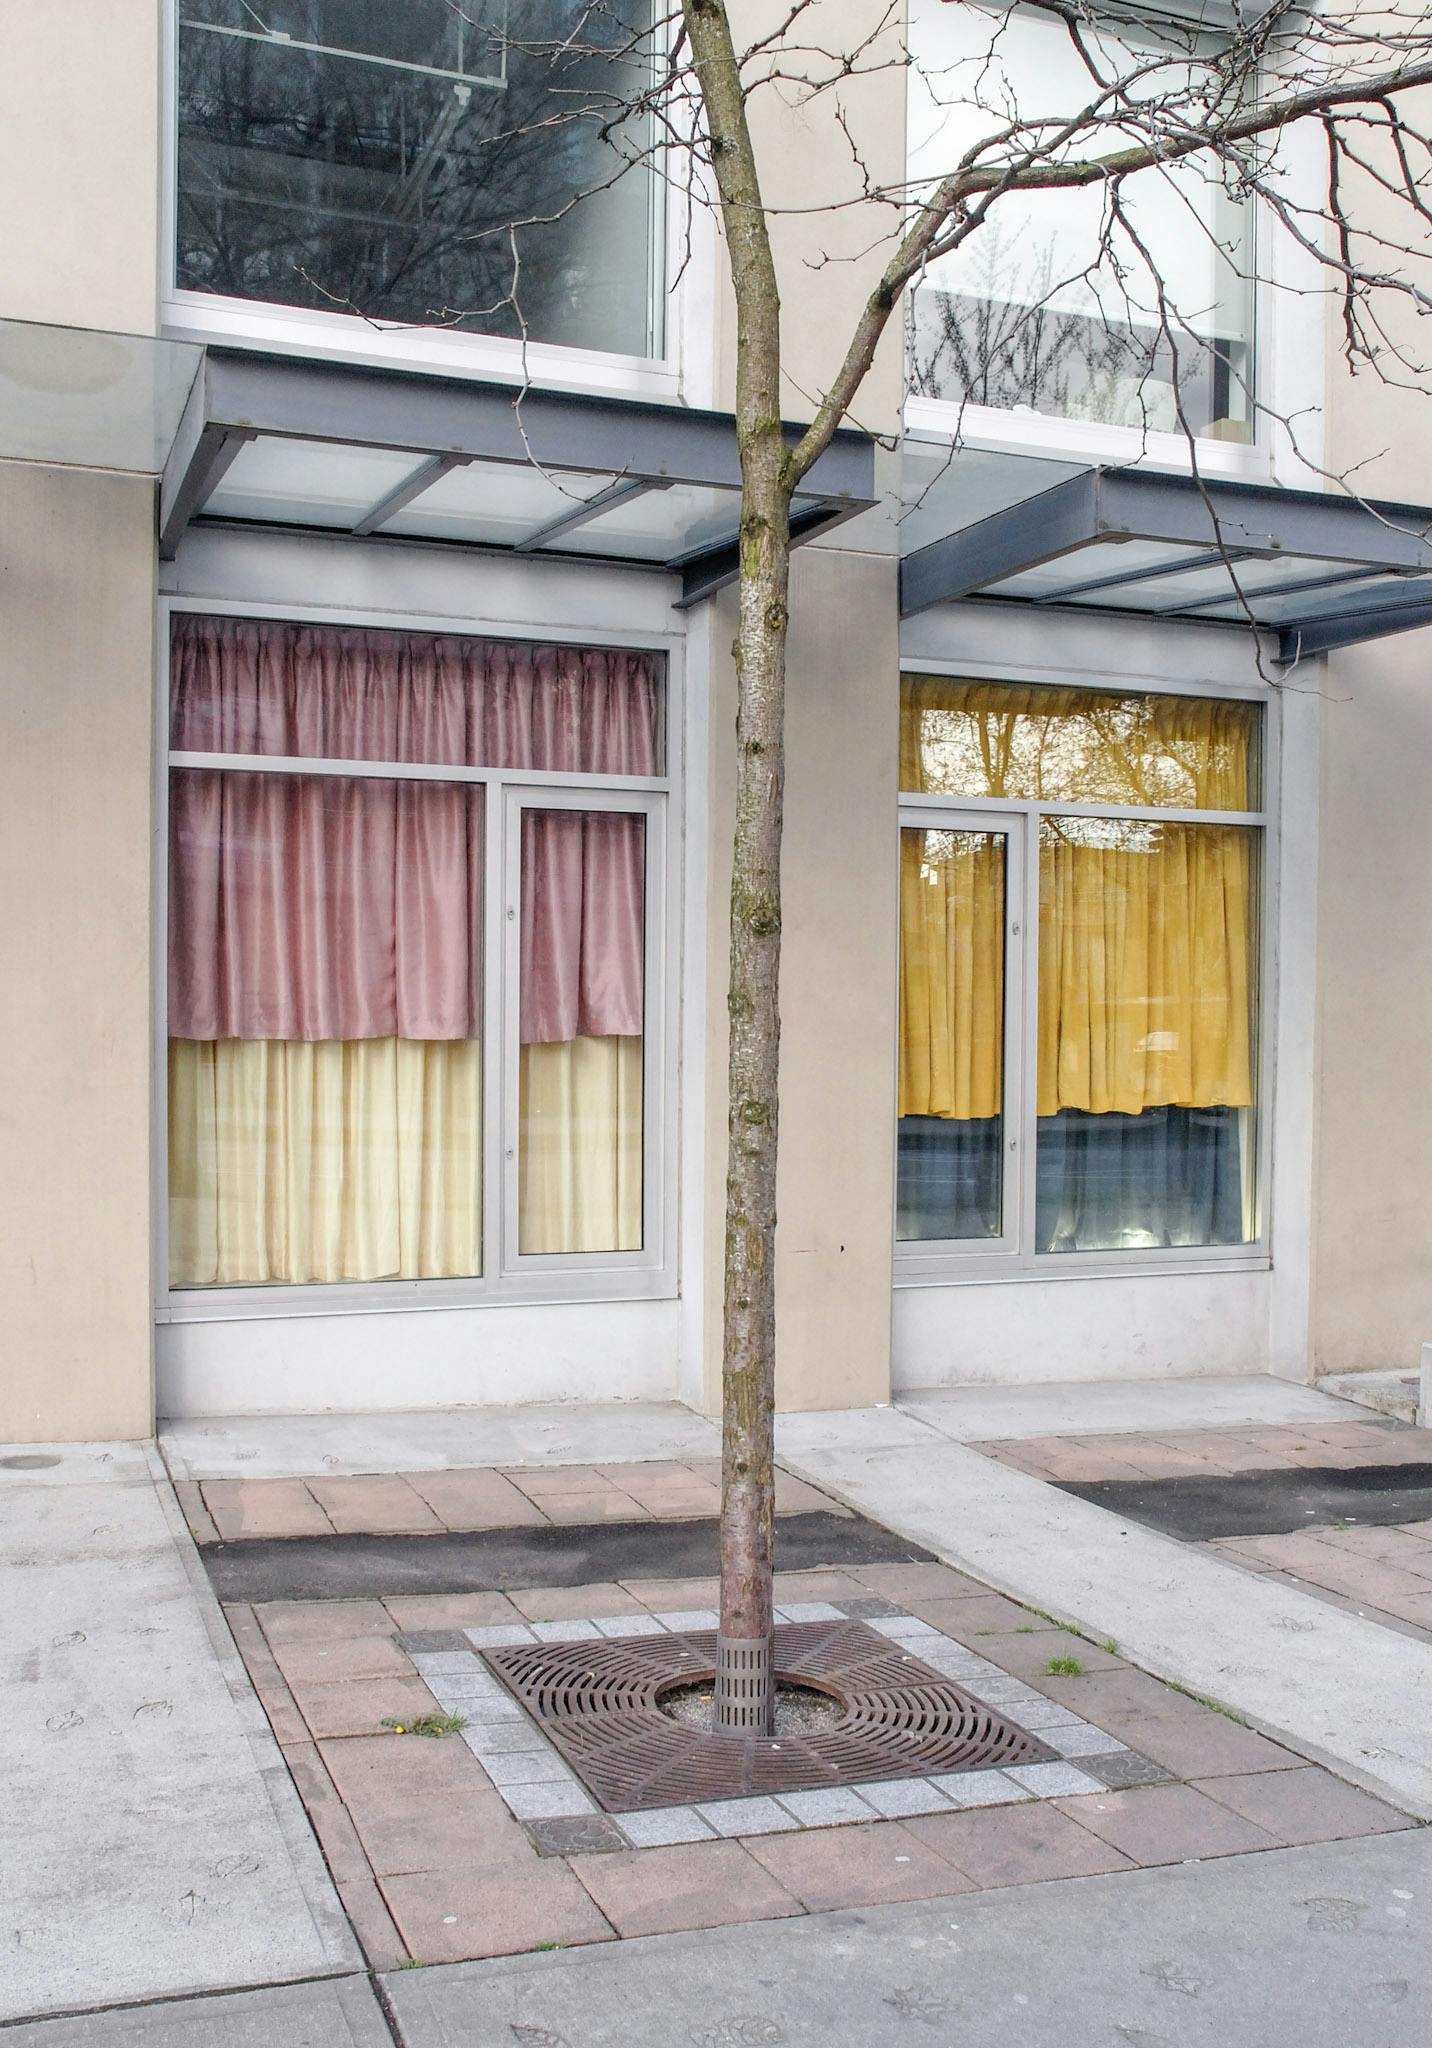 CAG’s window spaces are covered by the fabric installation by Derek Brunen. Two of those windows visible in this image are covered with pink, yellow and dark blue curtains. 